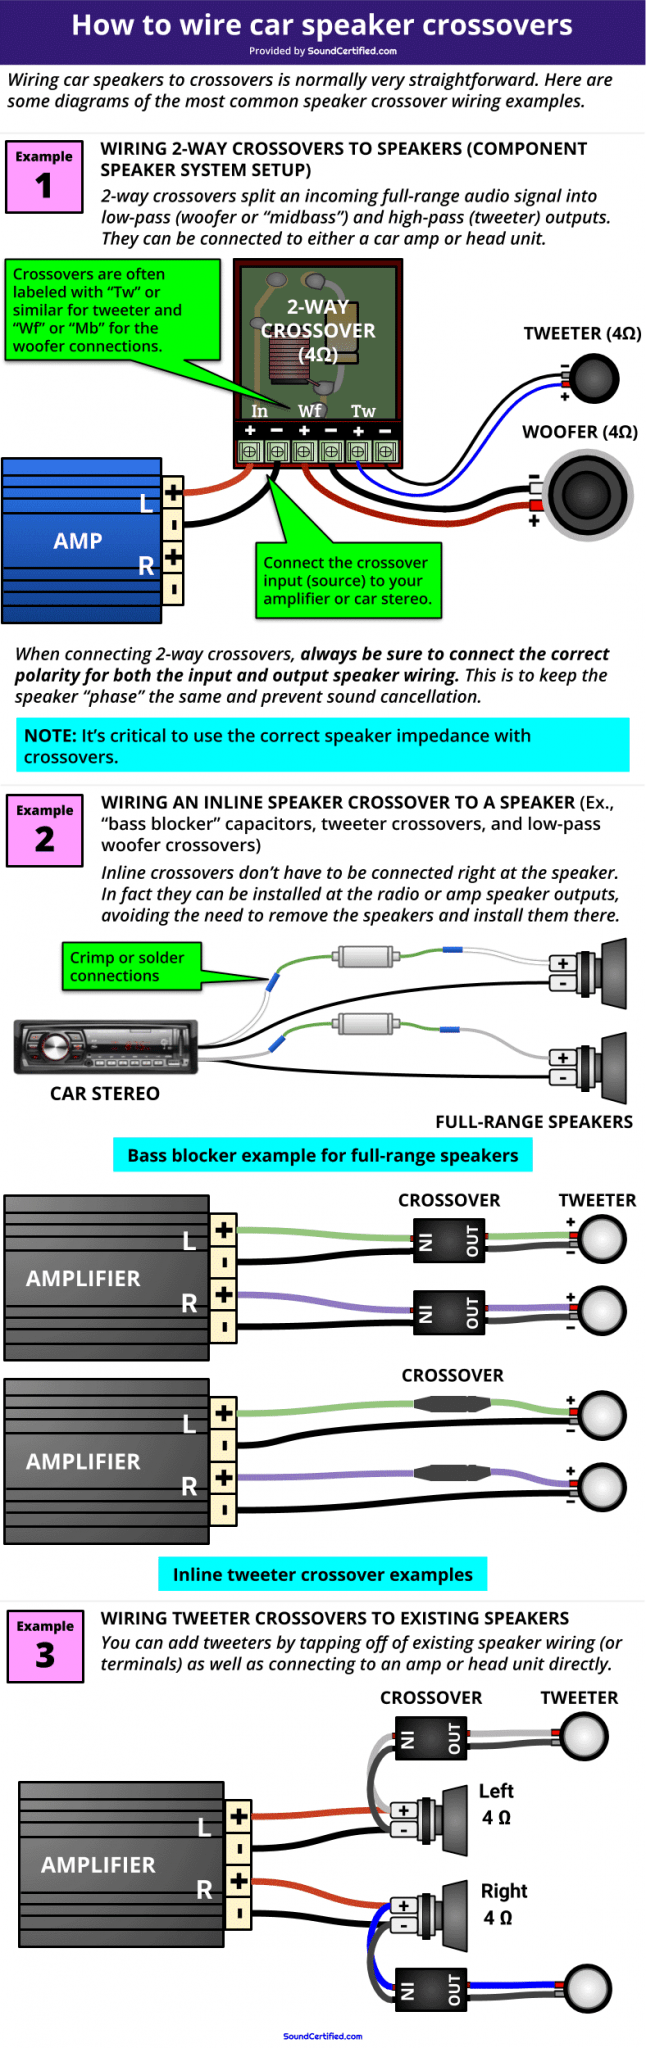 how-to-install-and-wire-car-speaker-crossovers-the-right-way